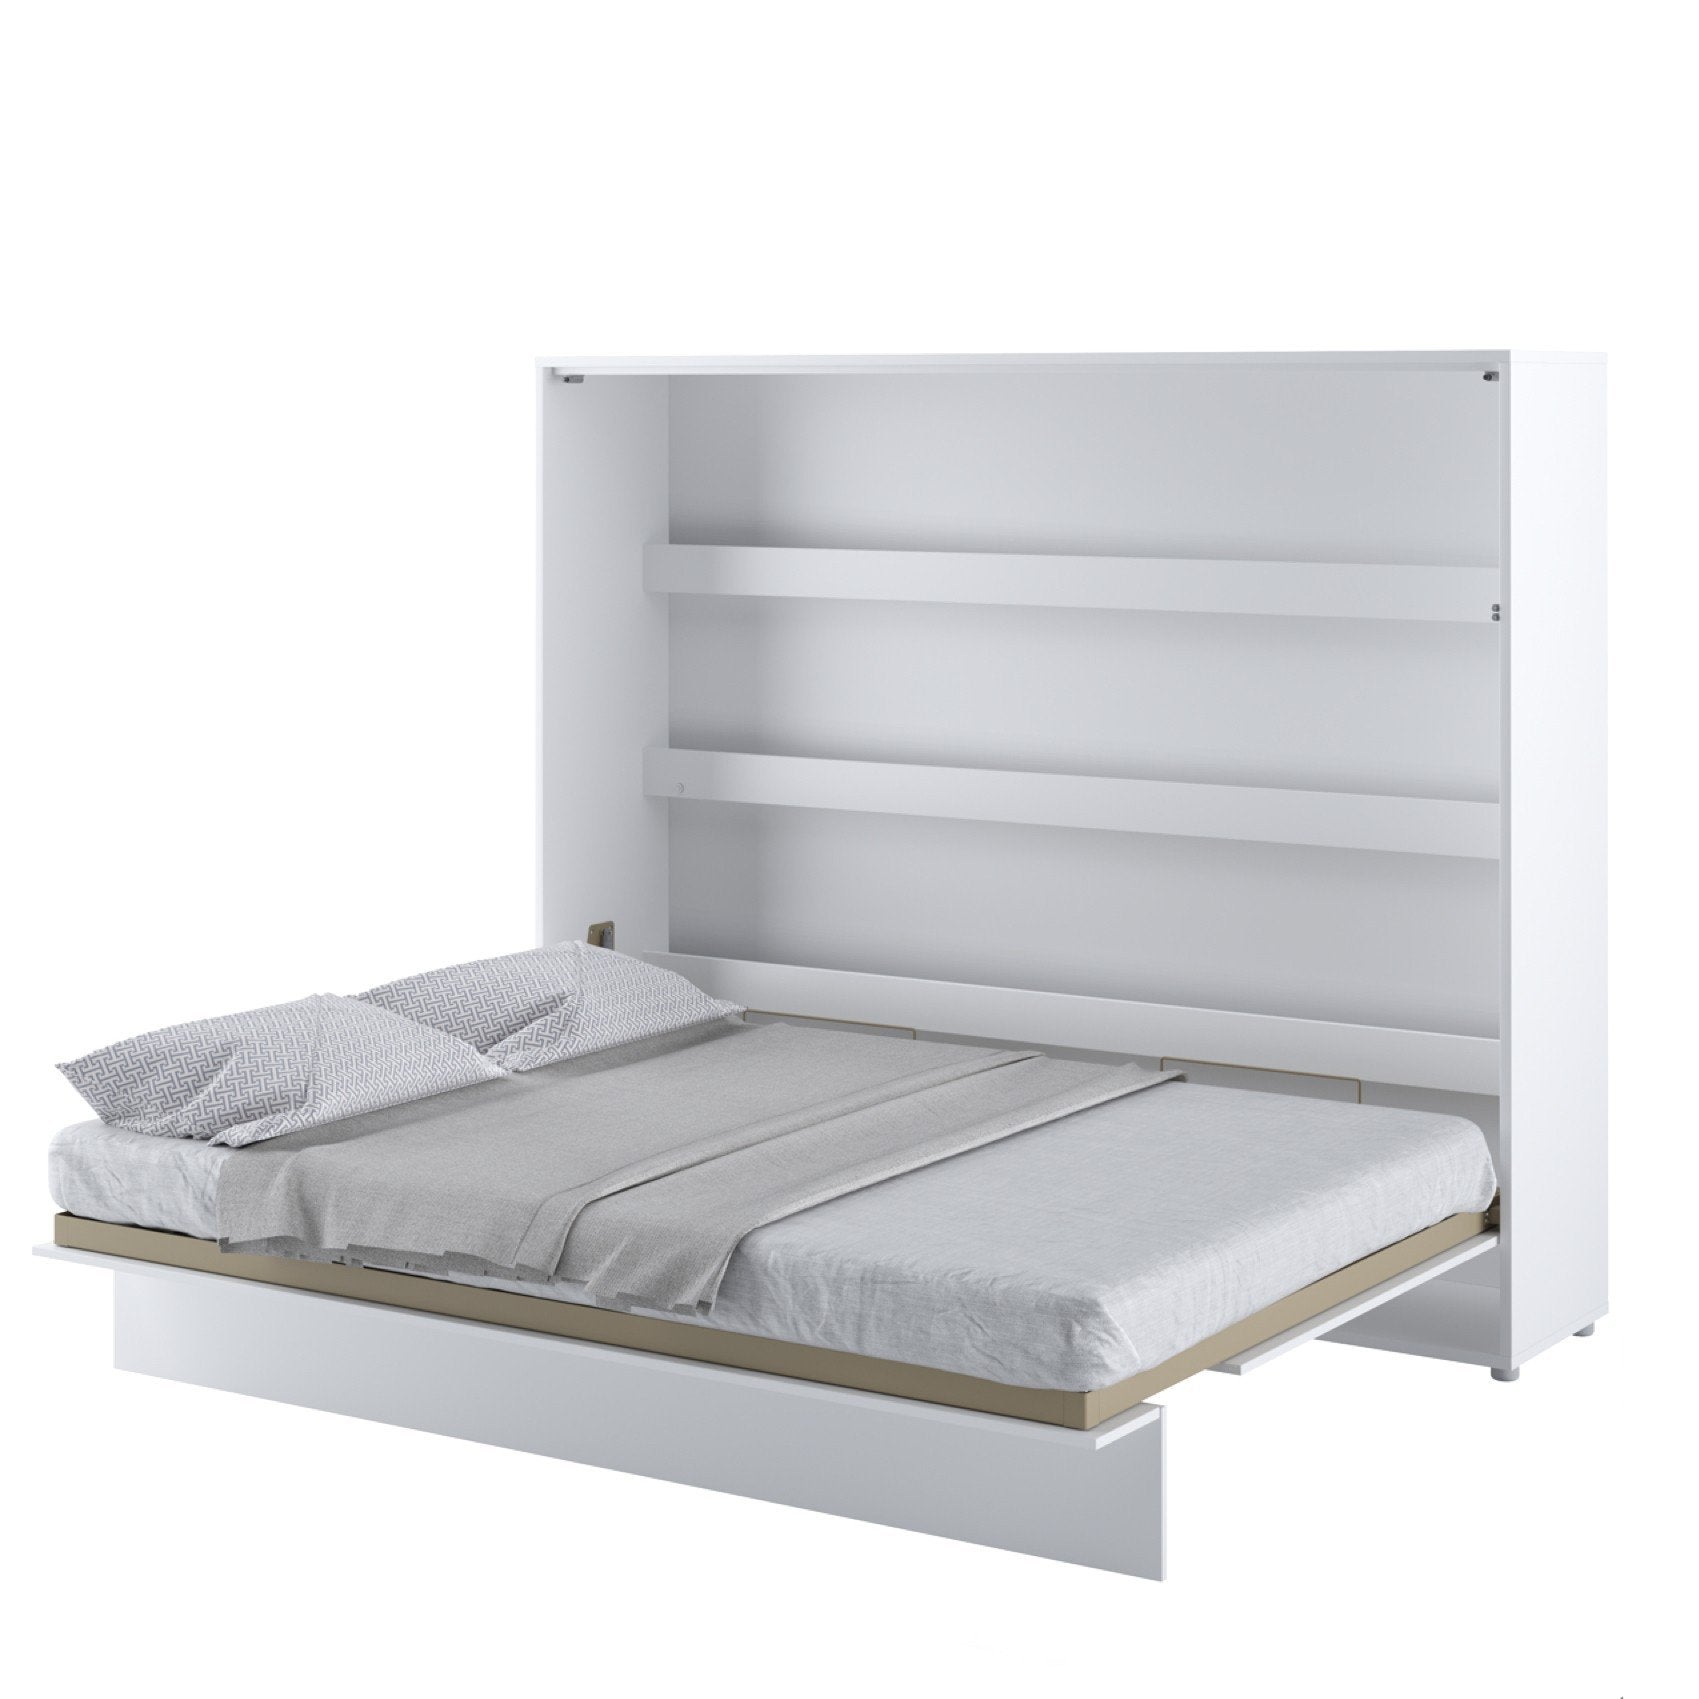 BC-14 Horizontal Wall Bed Concept 160cm - Furniture Gold